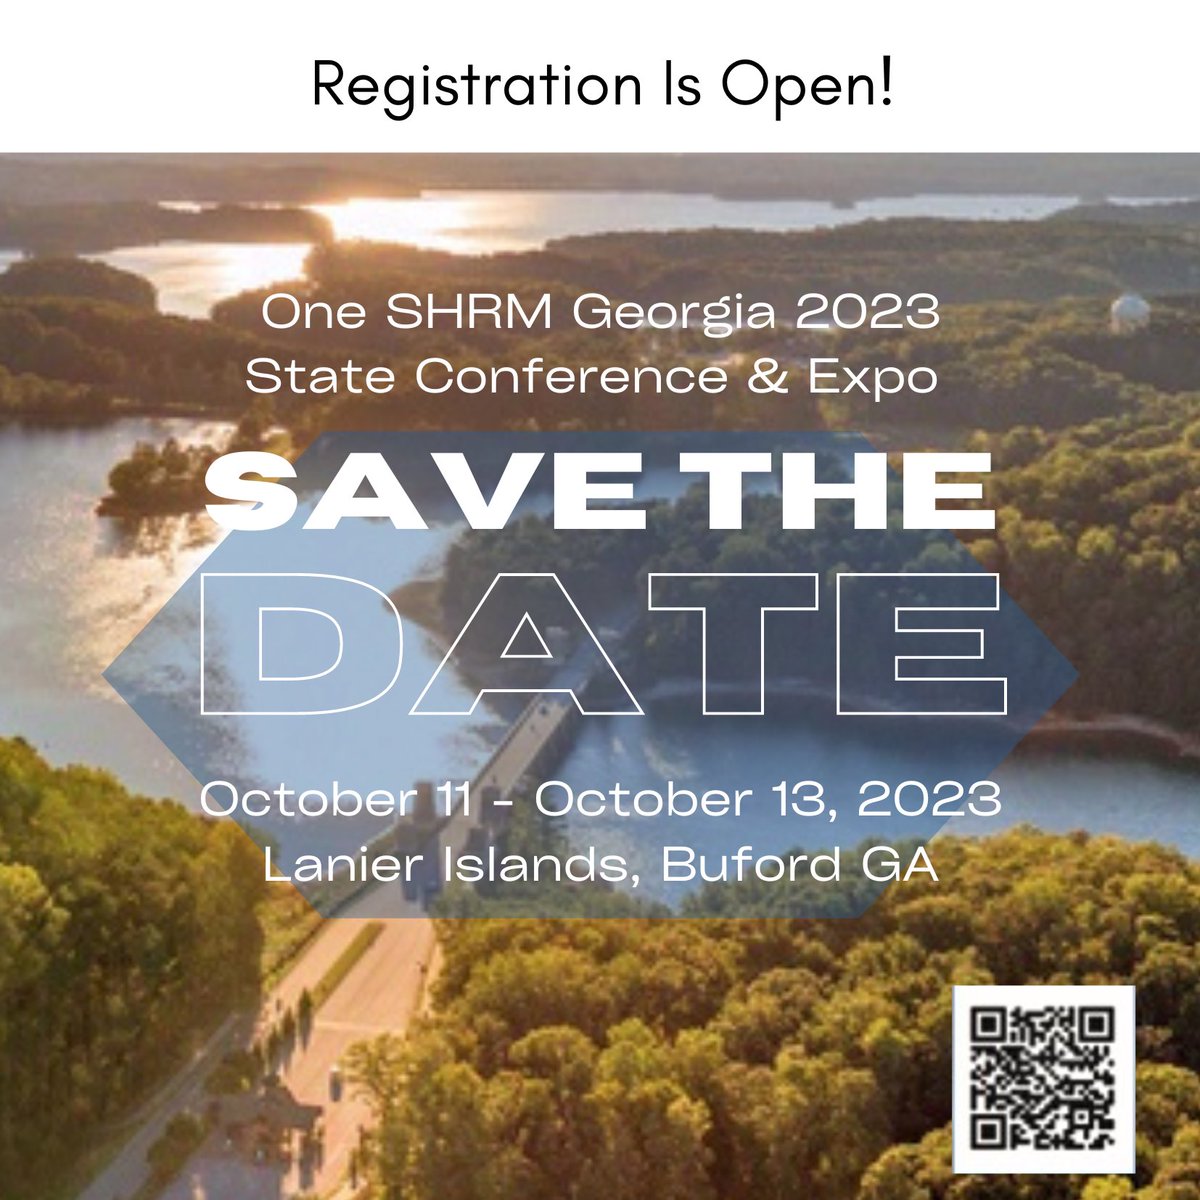 Save The Date for One SHRM Georgia 2023 State Conference and Expo! Stay tuned for more details soon! #hr #shrm23 #shrmgeorgia #shrm